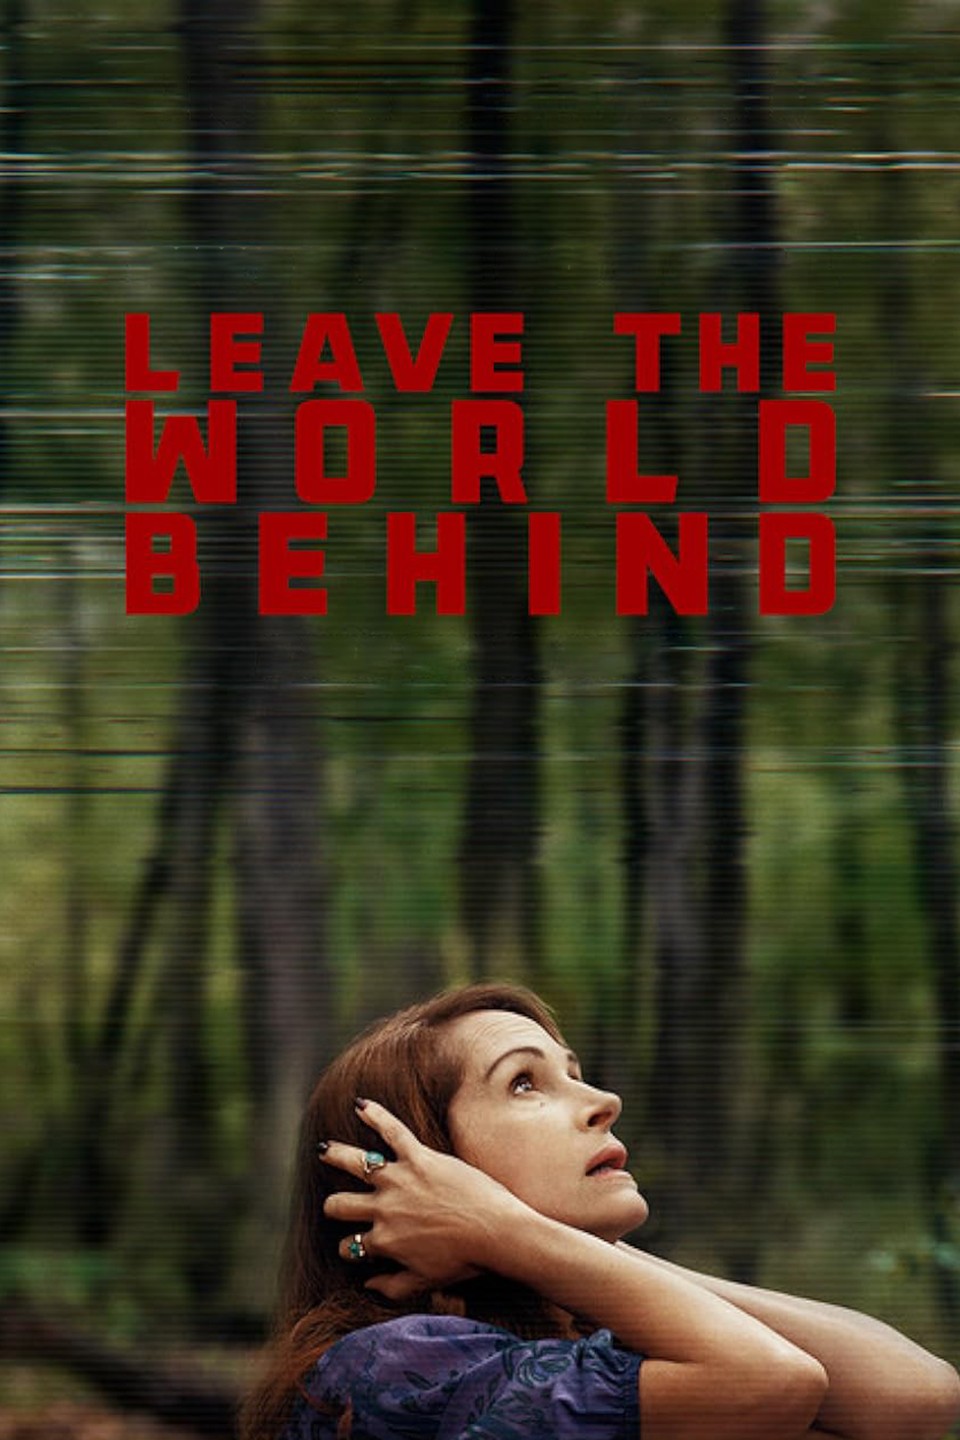 Obamas Score a Hit With Netflix Film 'Leave the World Behind